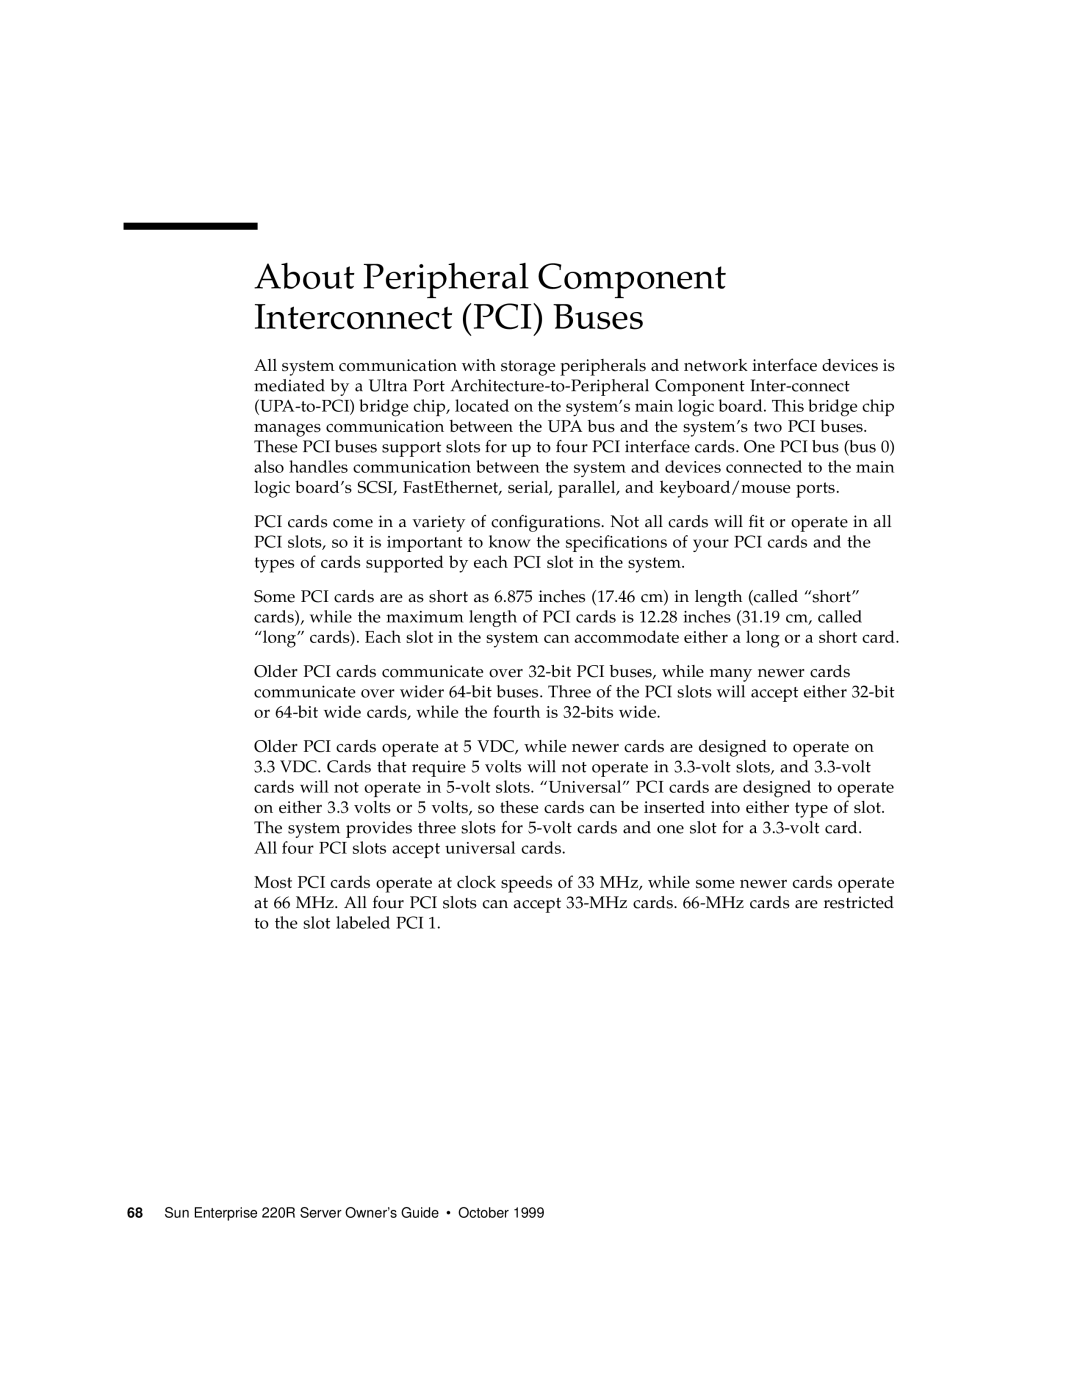 Sun Microsystems 220R manual About Peripheral Component Interconnect PCI Buses 